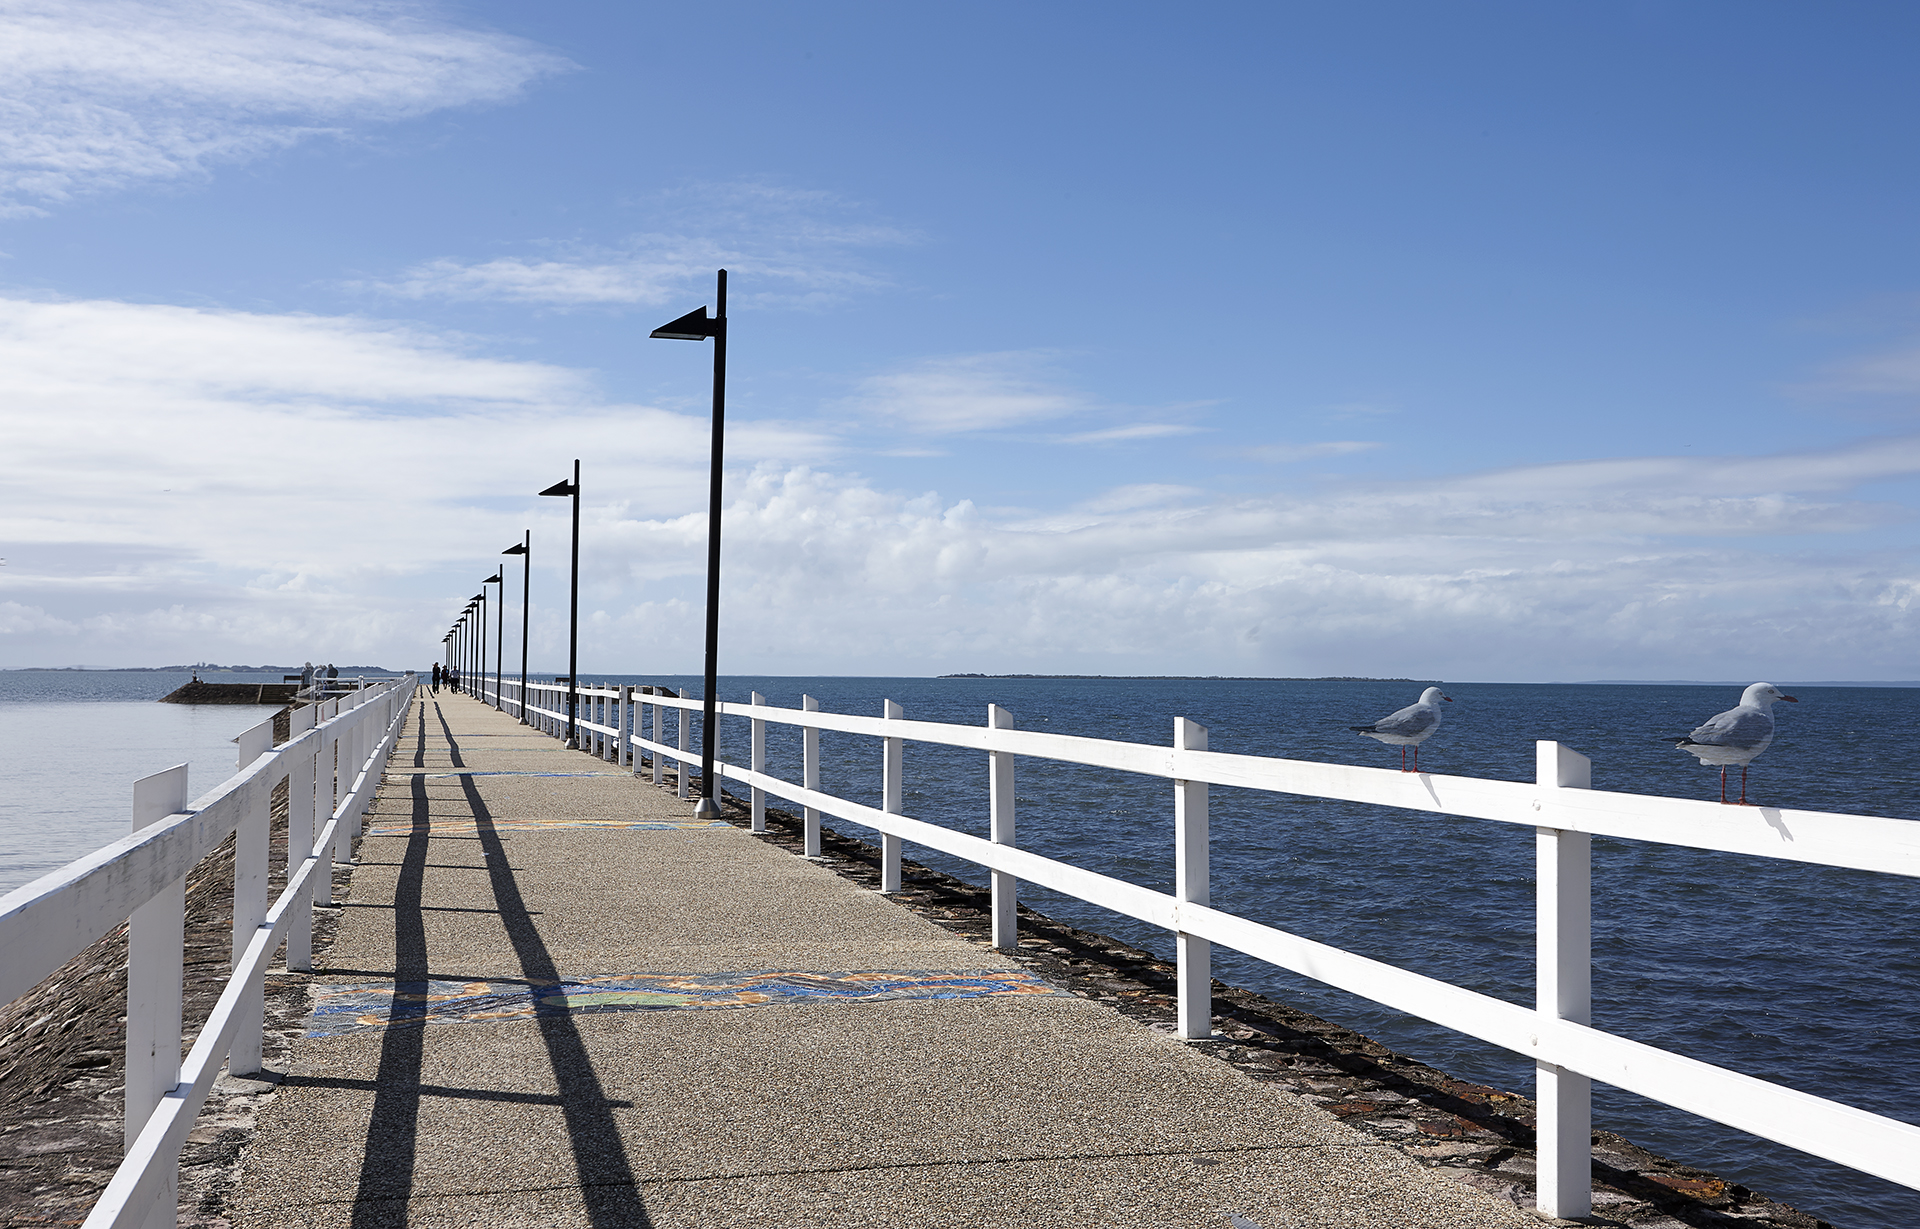 This is an image of the Wynnum foreshore